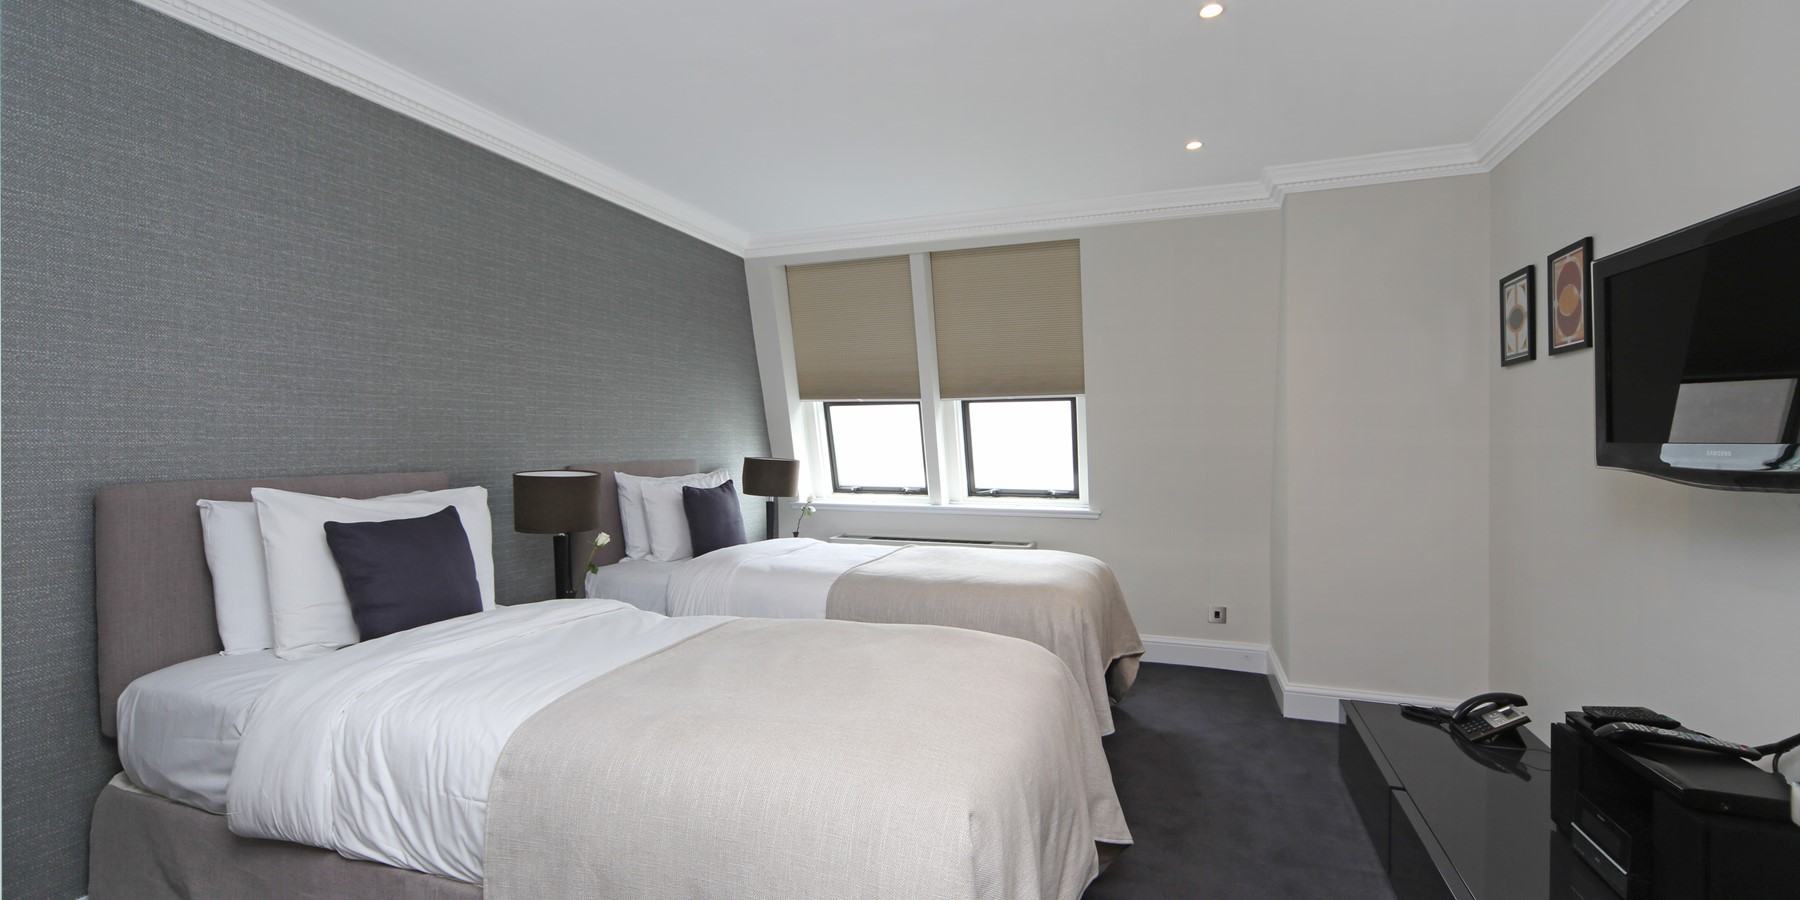 mayfair house twin bedded room